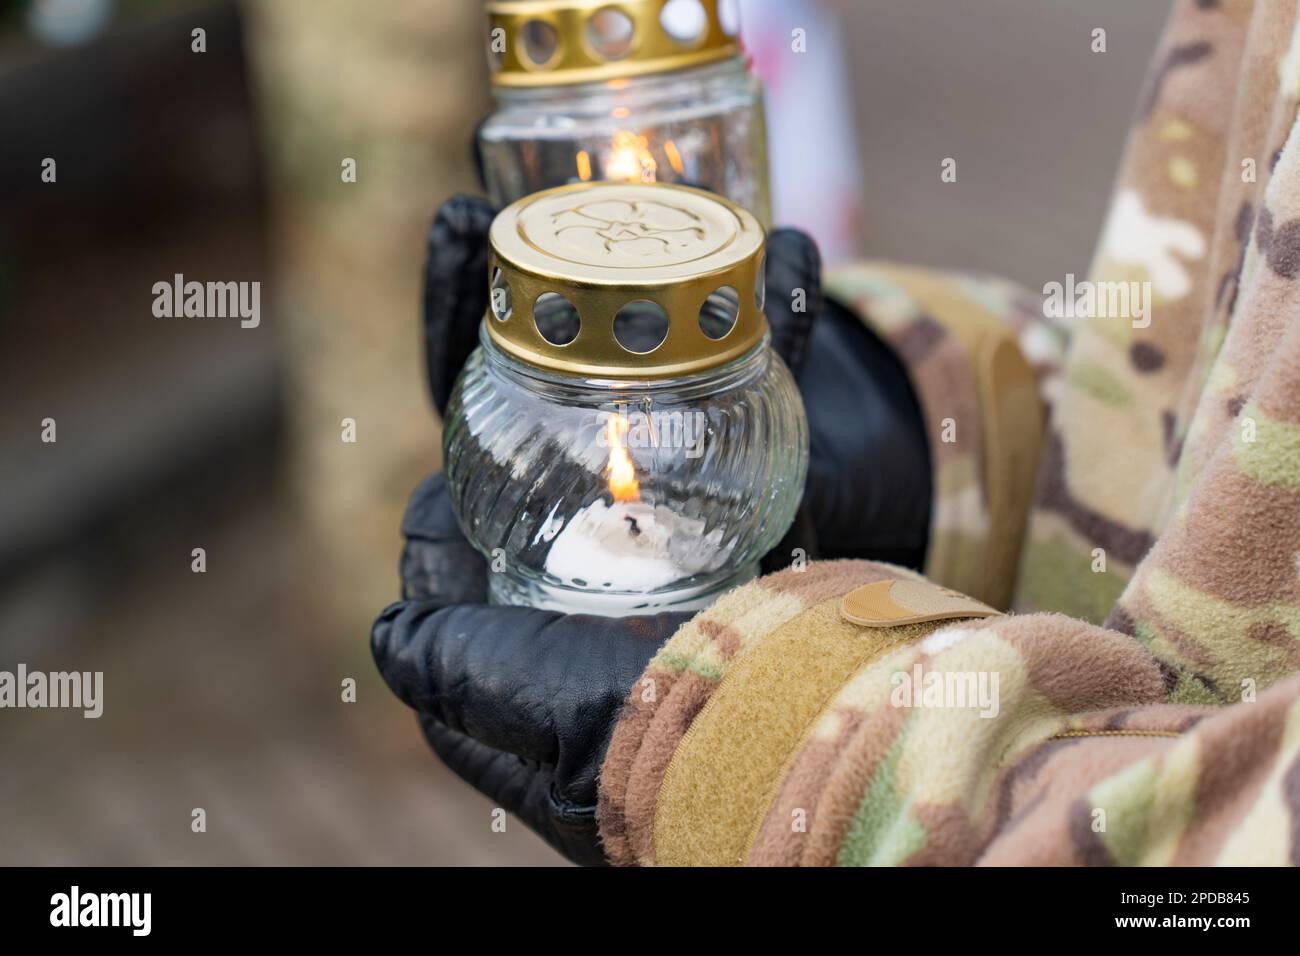 A soldier in camouflage and black gloves holds candlesticks at a military commemoration Stock Photo